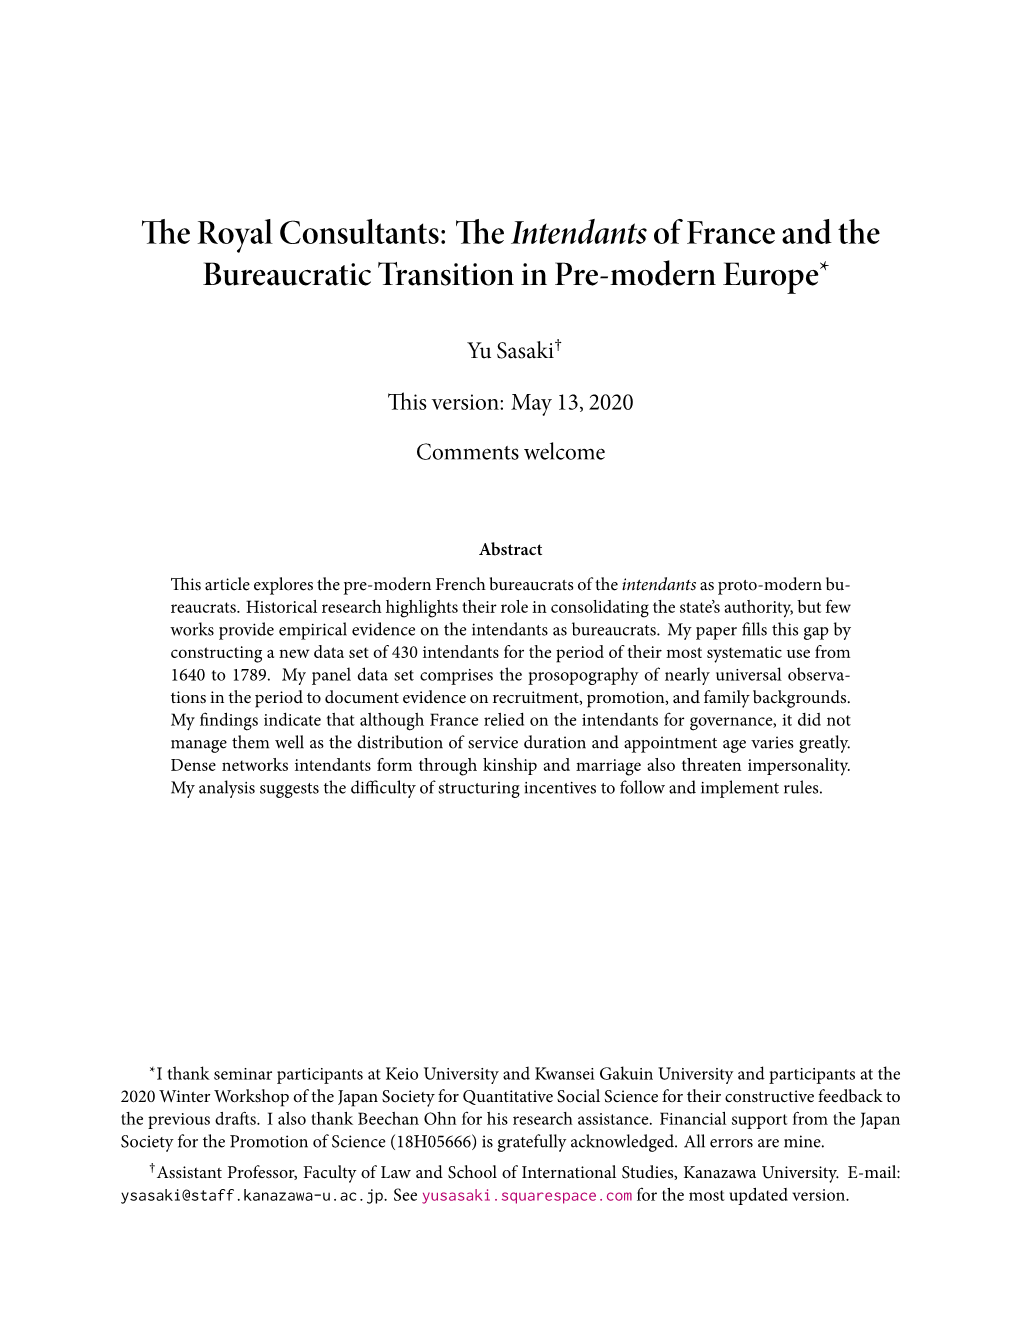 The Royal Consultants: the Intendants of France and the Bureaucratic Transition in Pre-Modern Europe*